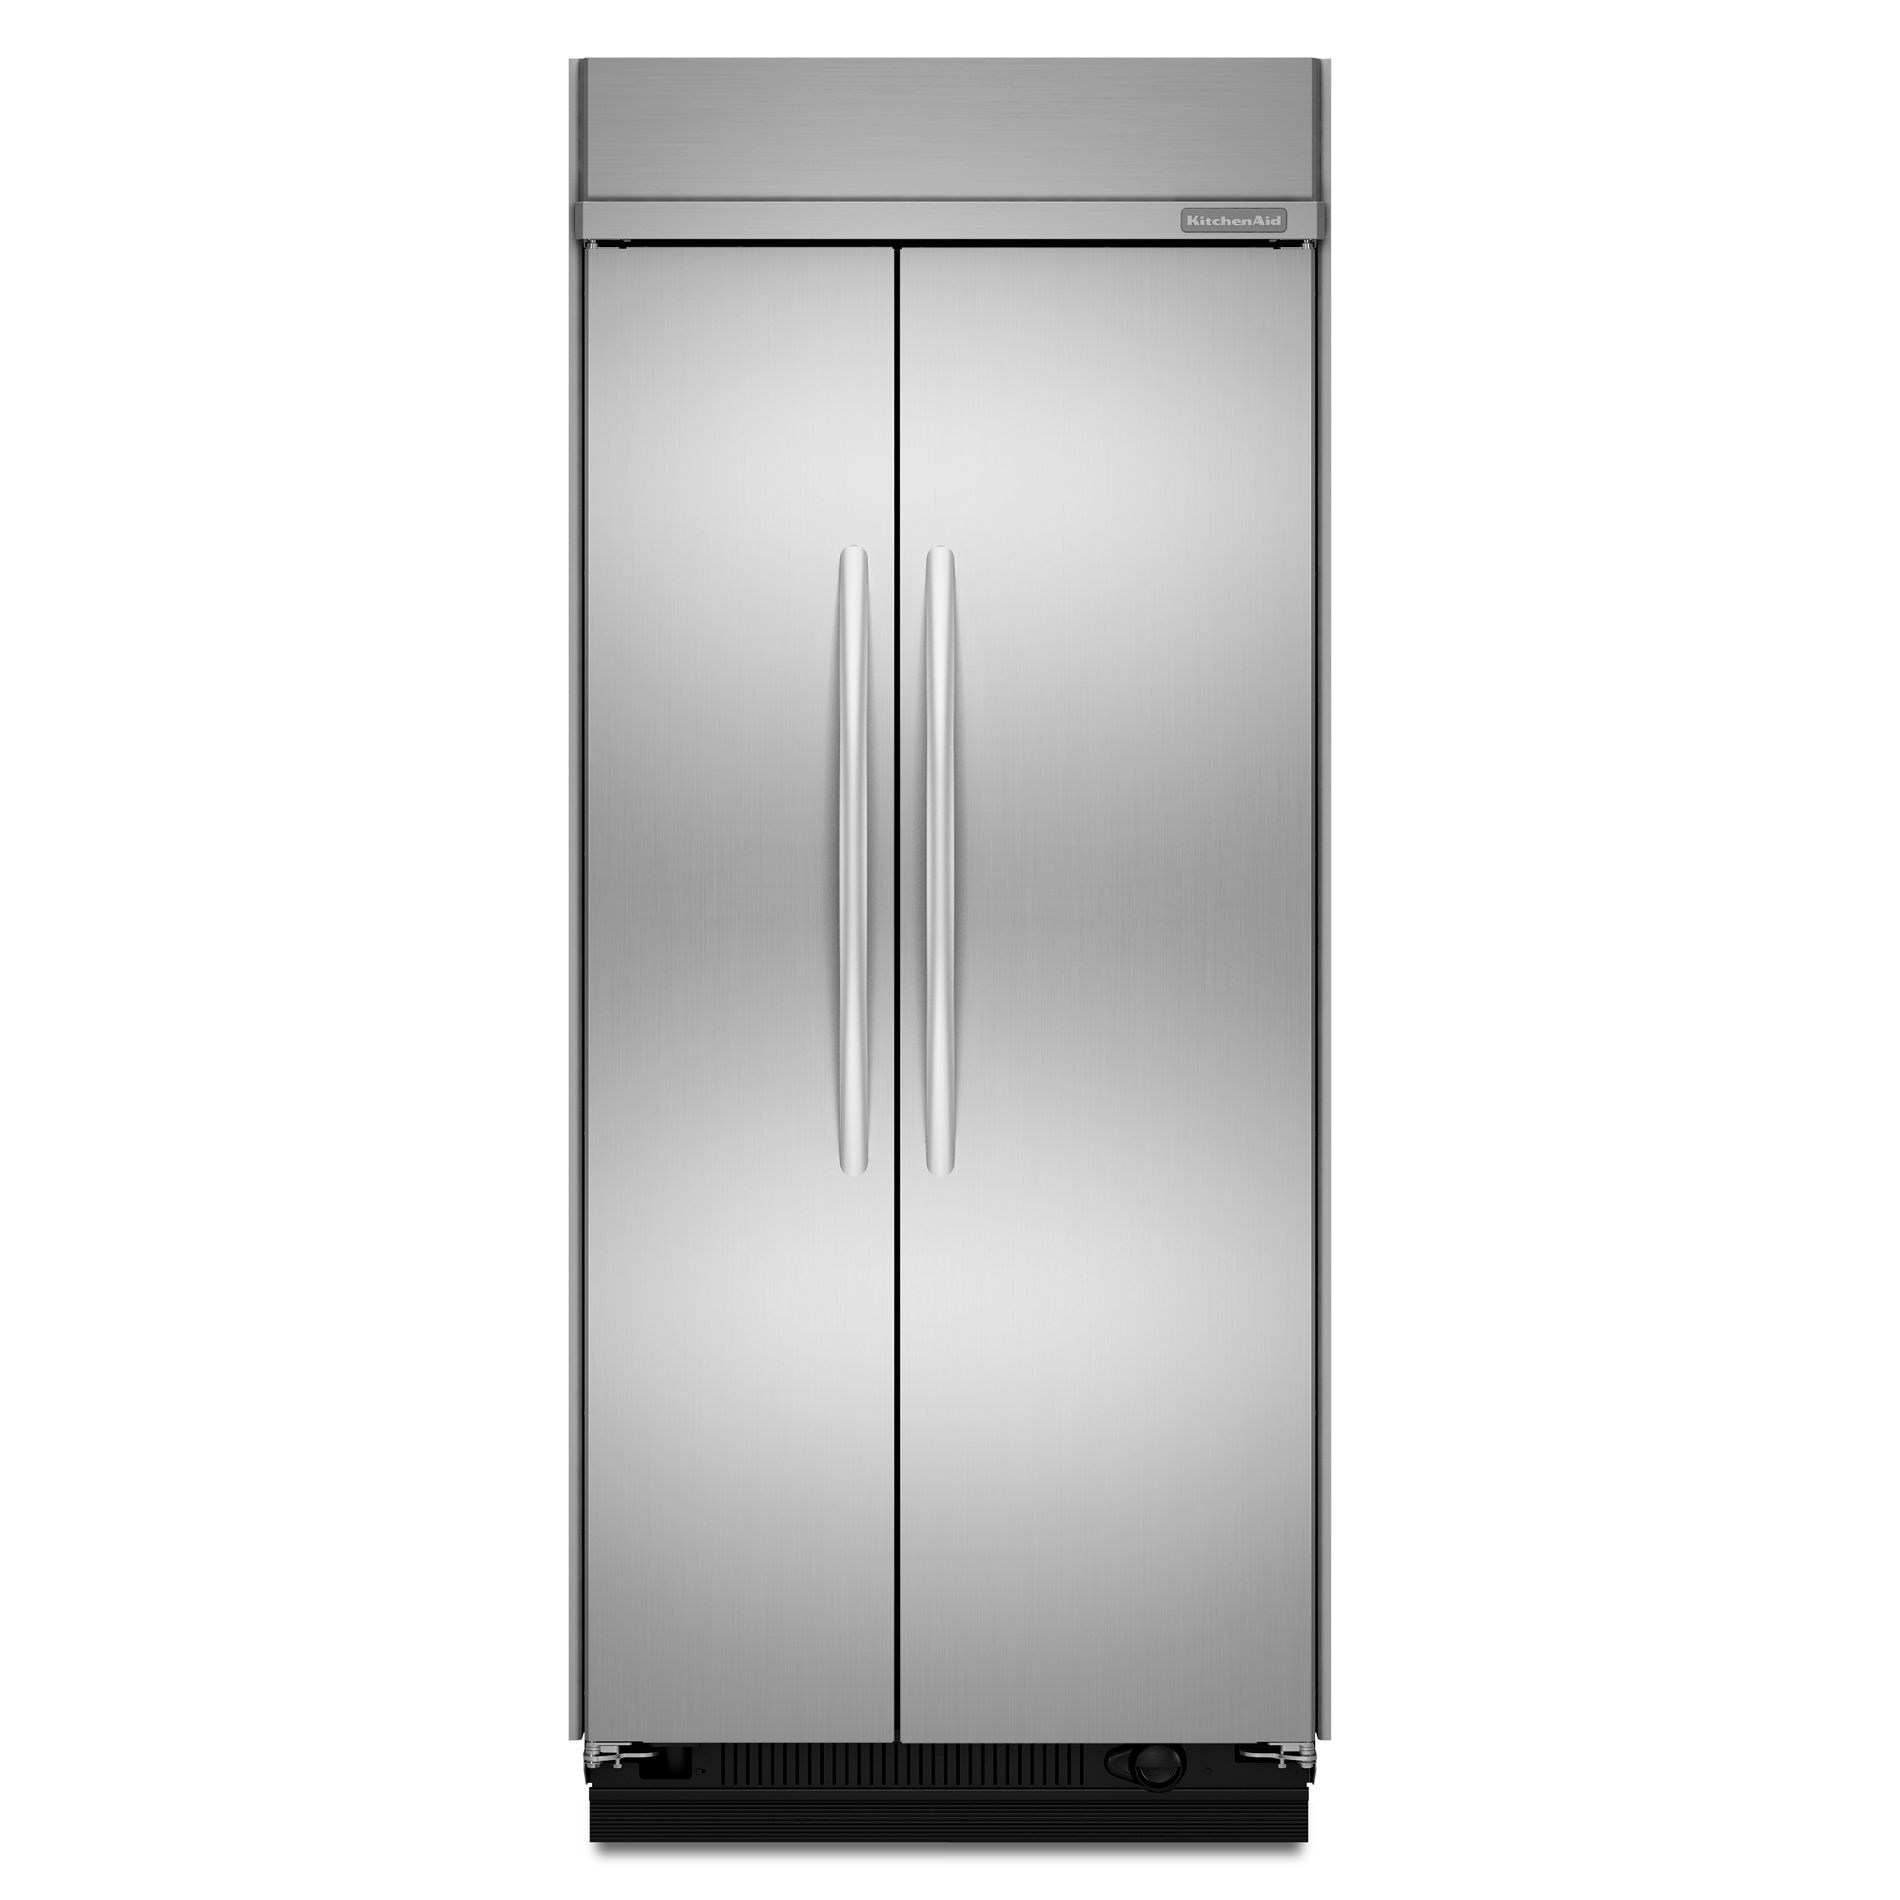 KitchenAid 25.3 cu. ft. Non-Dispensing Built-In Side-By-Side Refrigerator Stainless steel